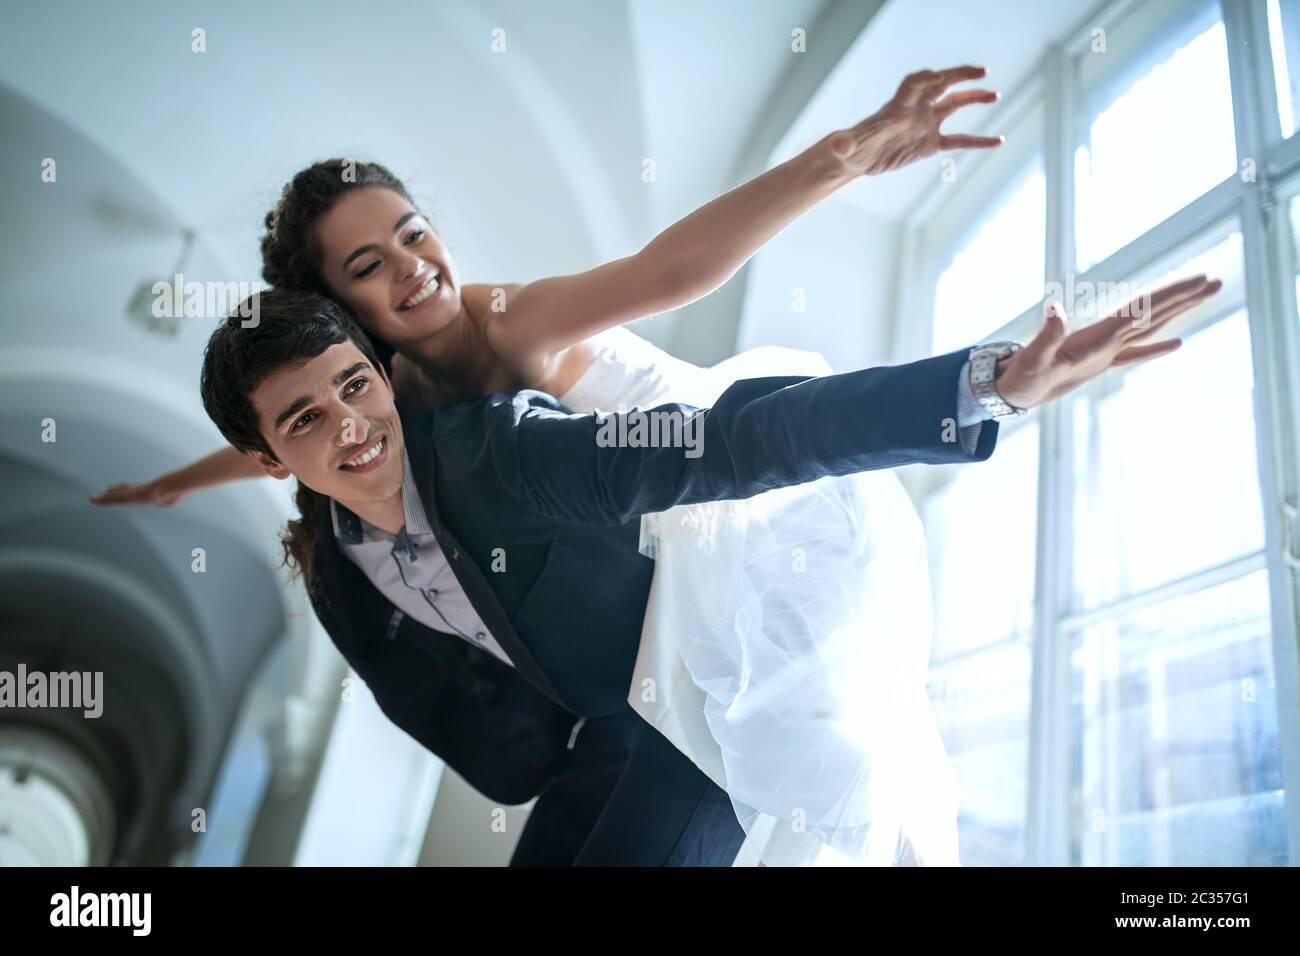 Young couple fooling around. Stock Photo